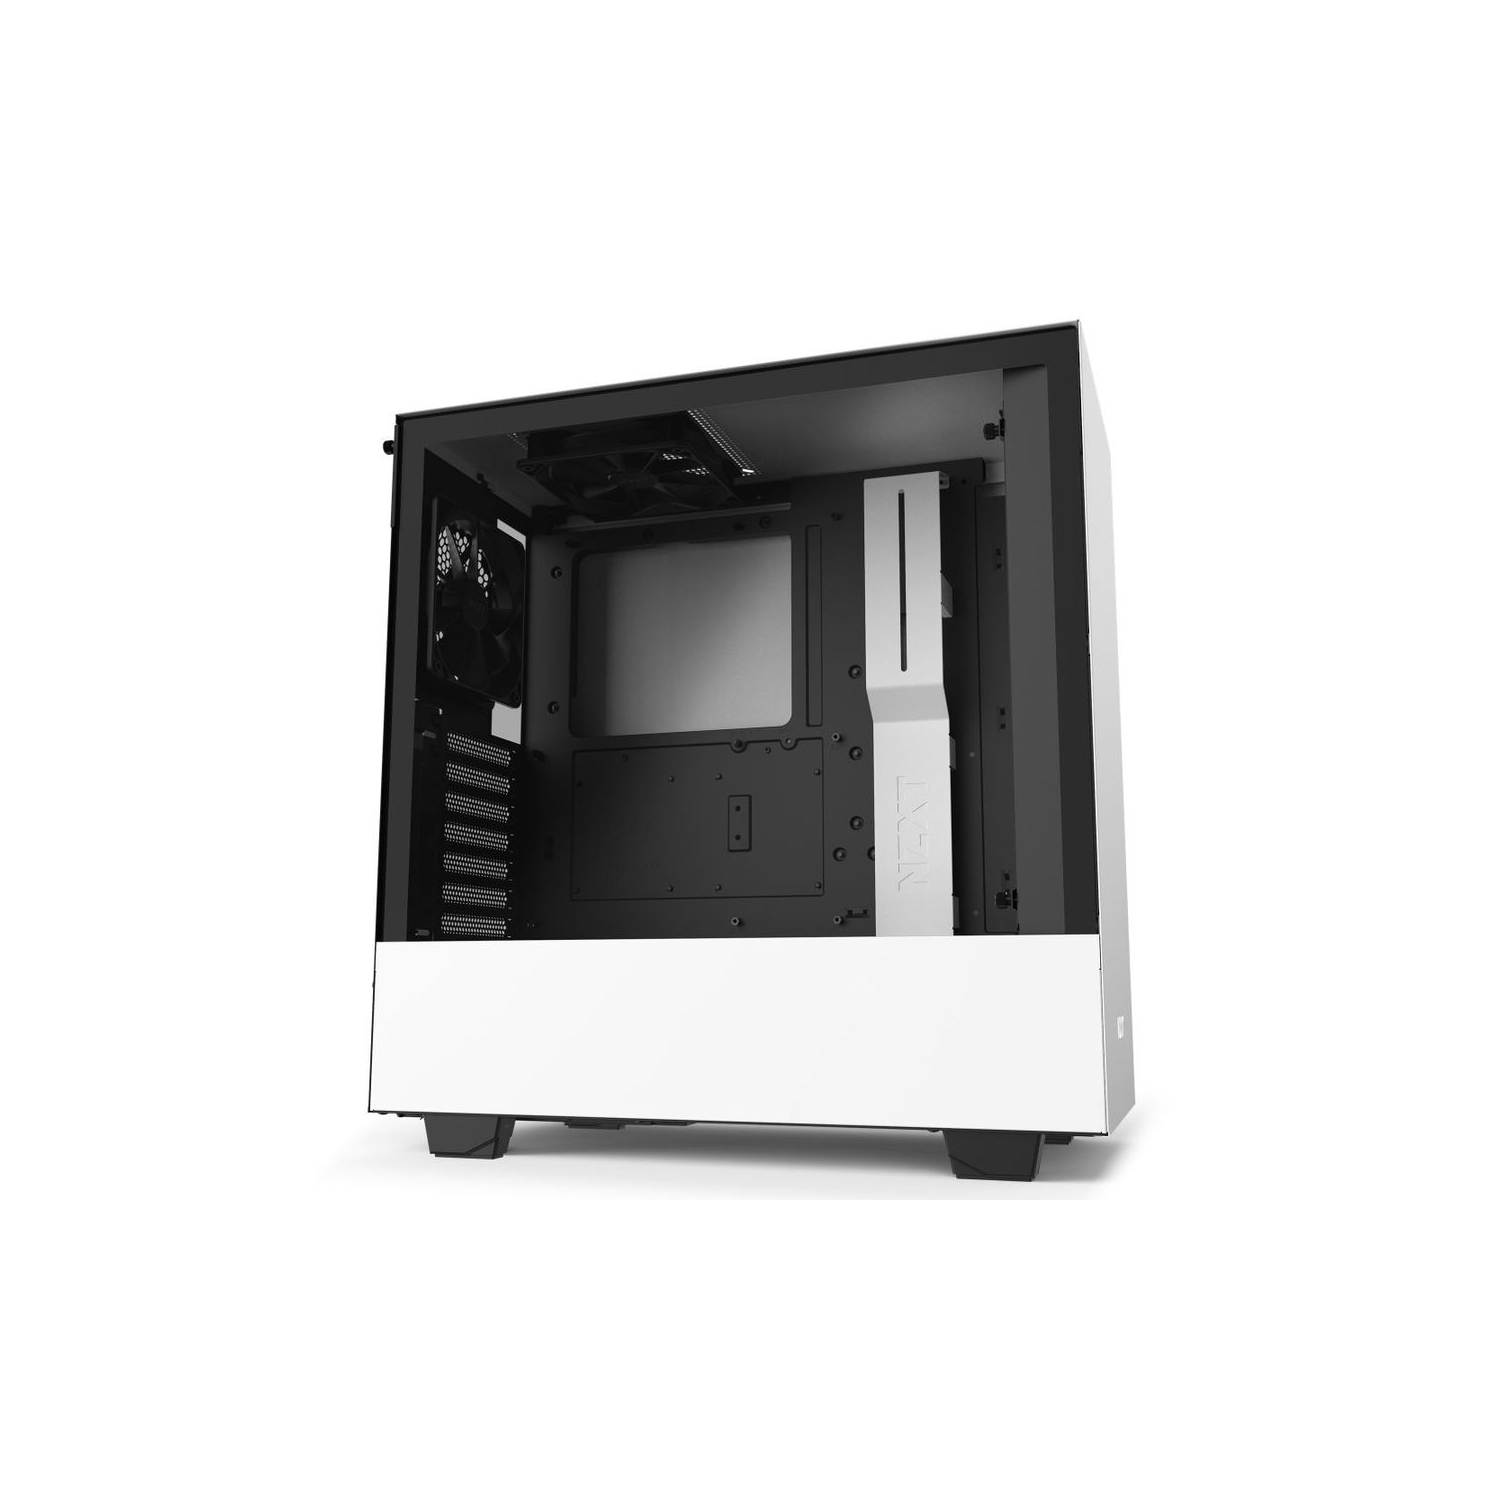 NZXT H510 - Compact ATX Mid-Tower Case - Front I/O USB Type-C Port - Tempered Glass Side Panel - White/Black (CA-H510B-W1)